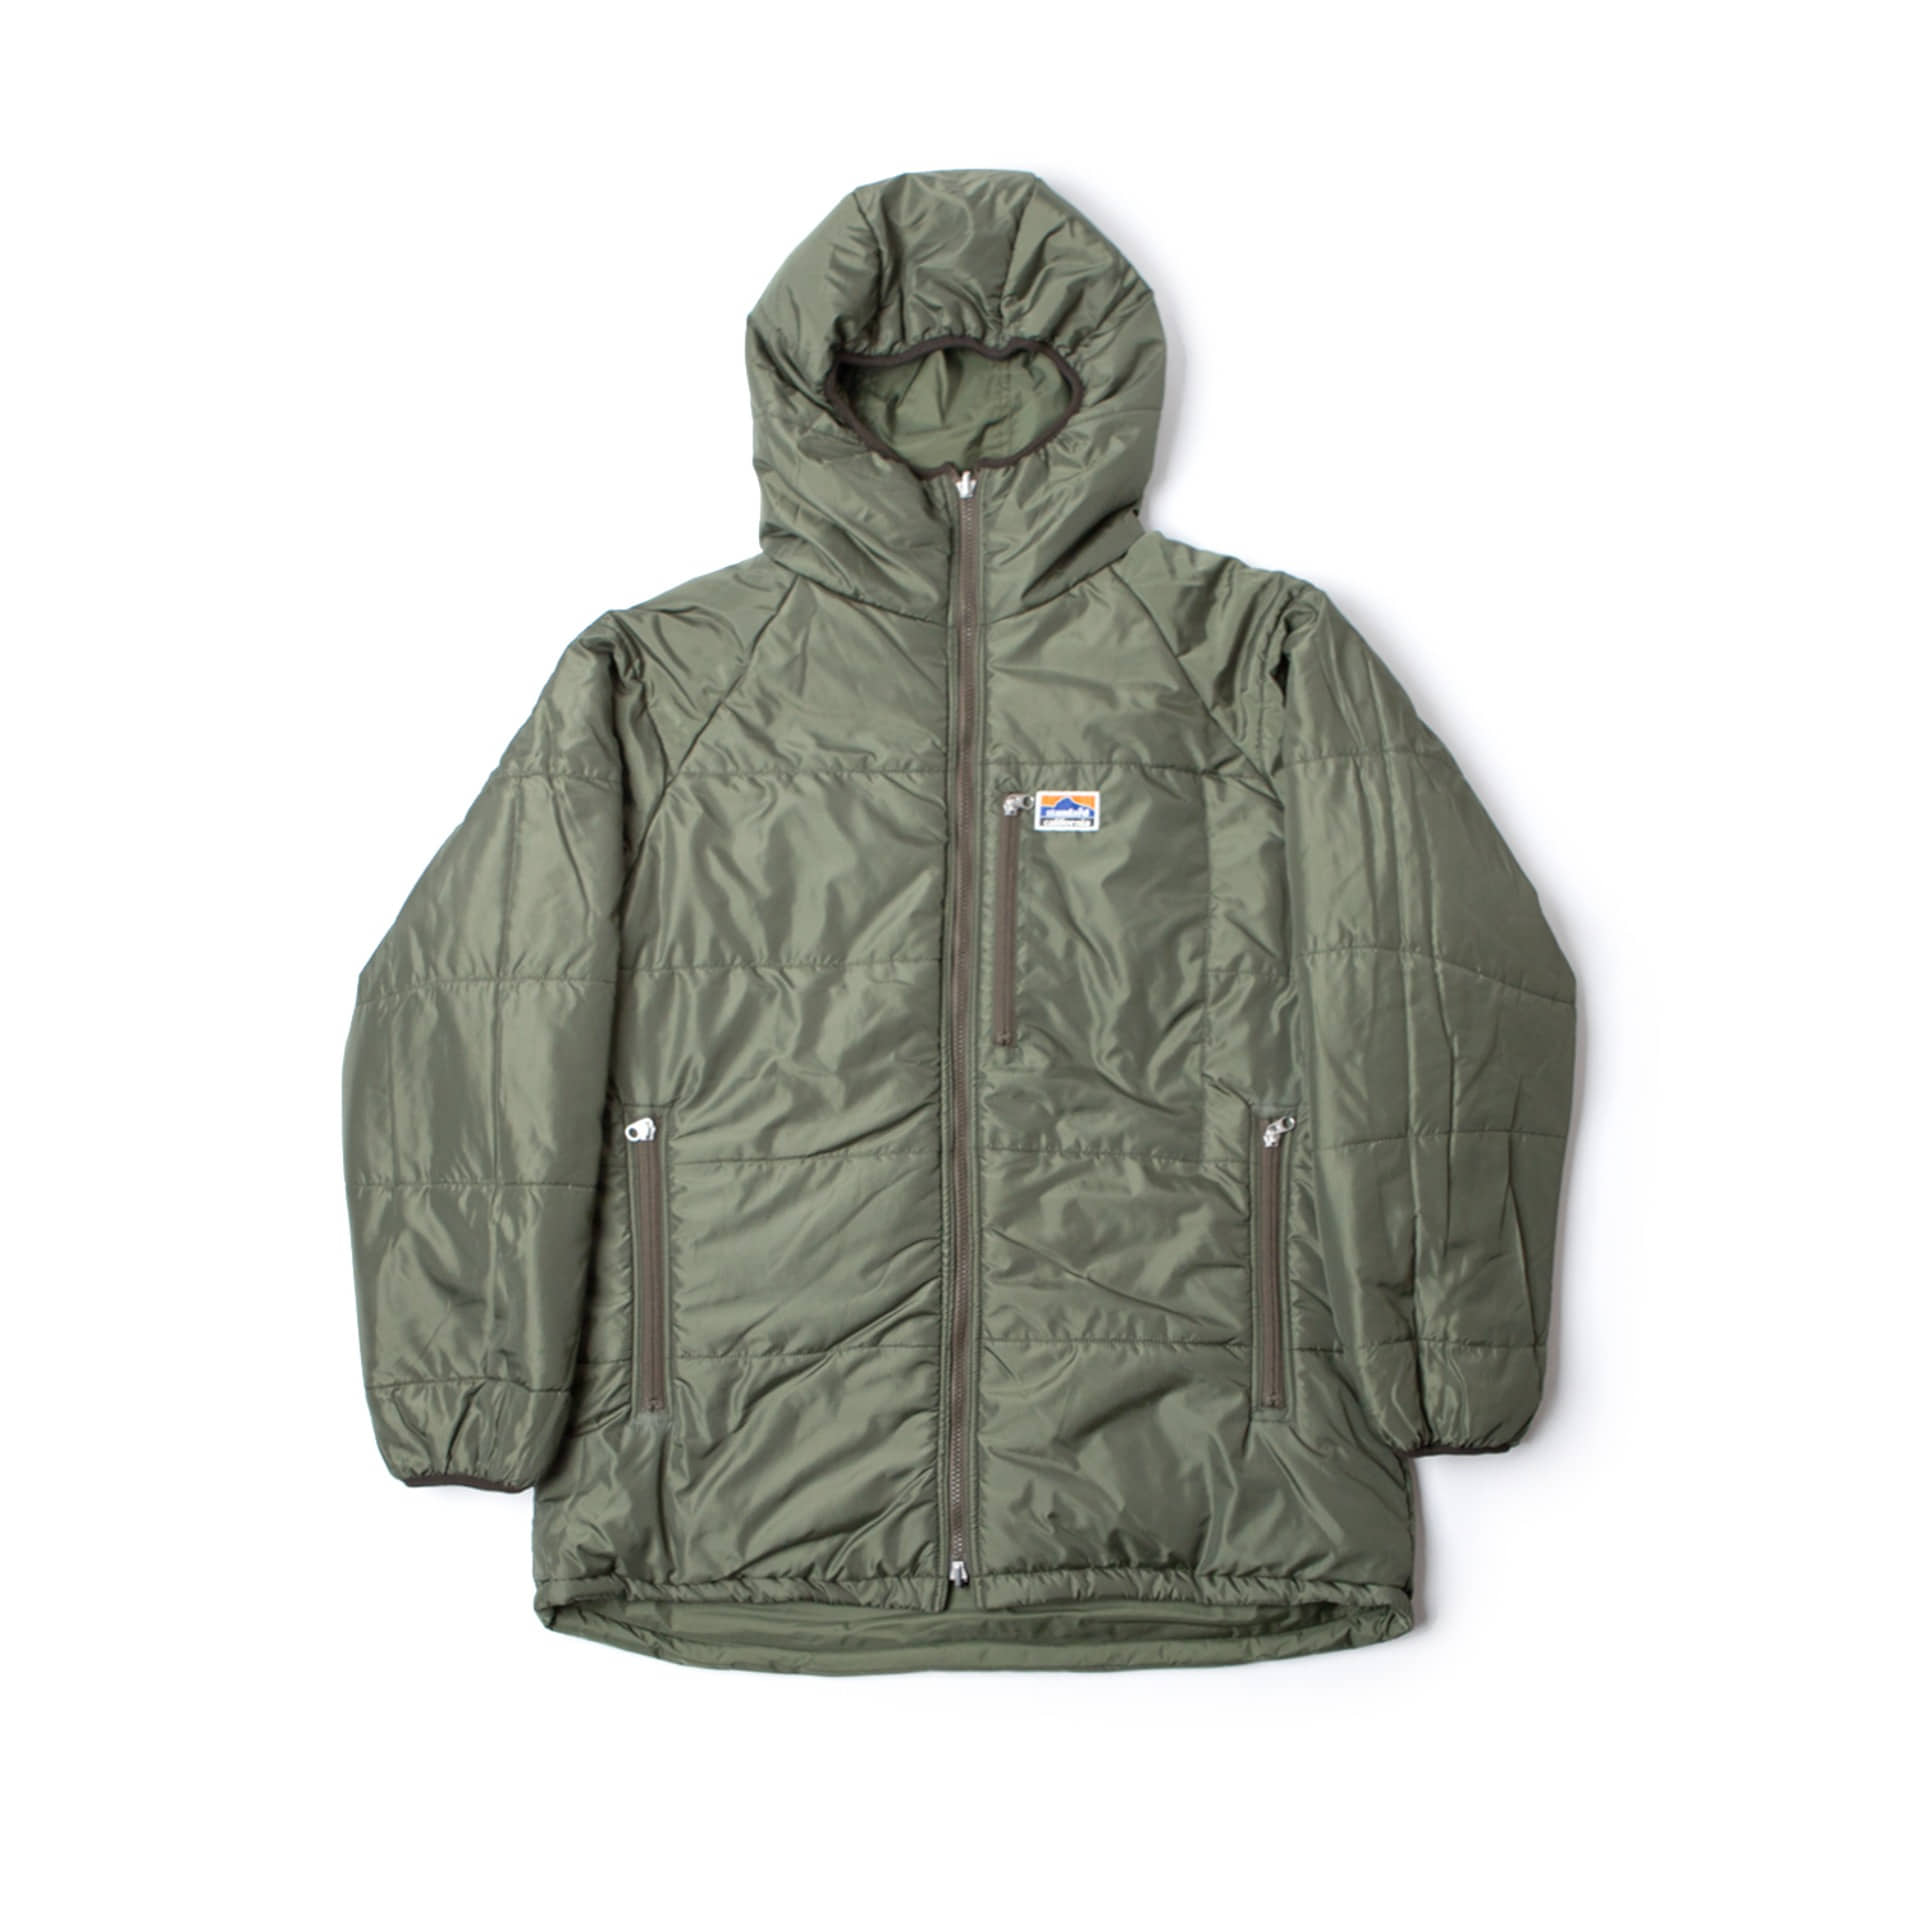 SD REVERSIBLE PUFF JACKET(Olive)